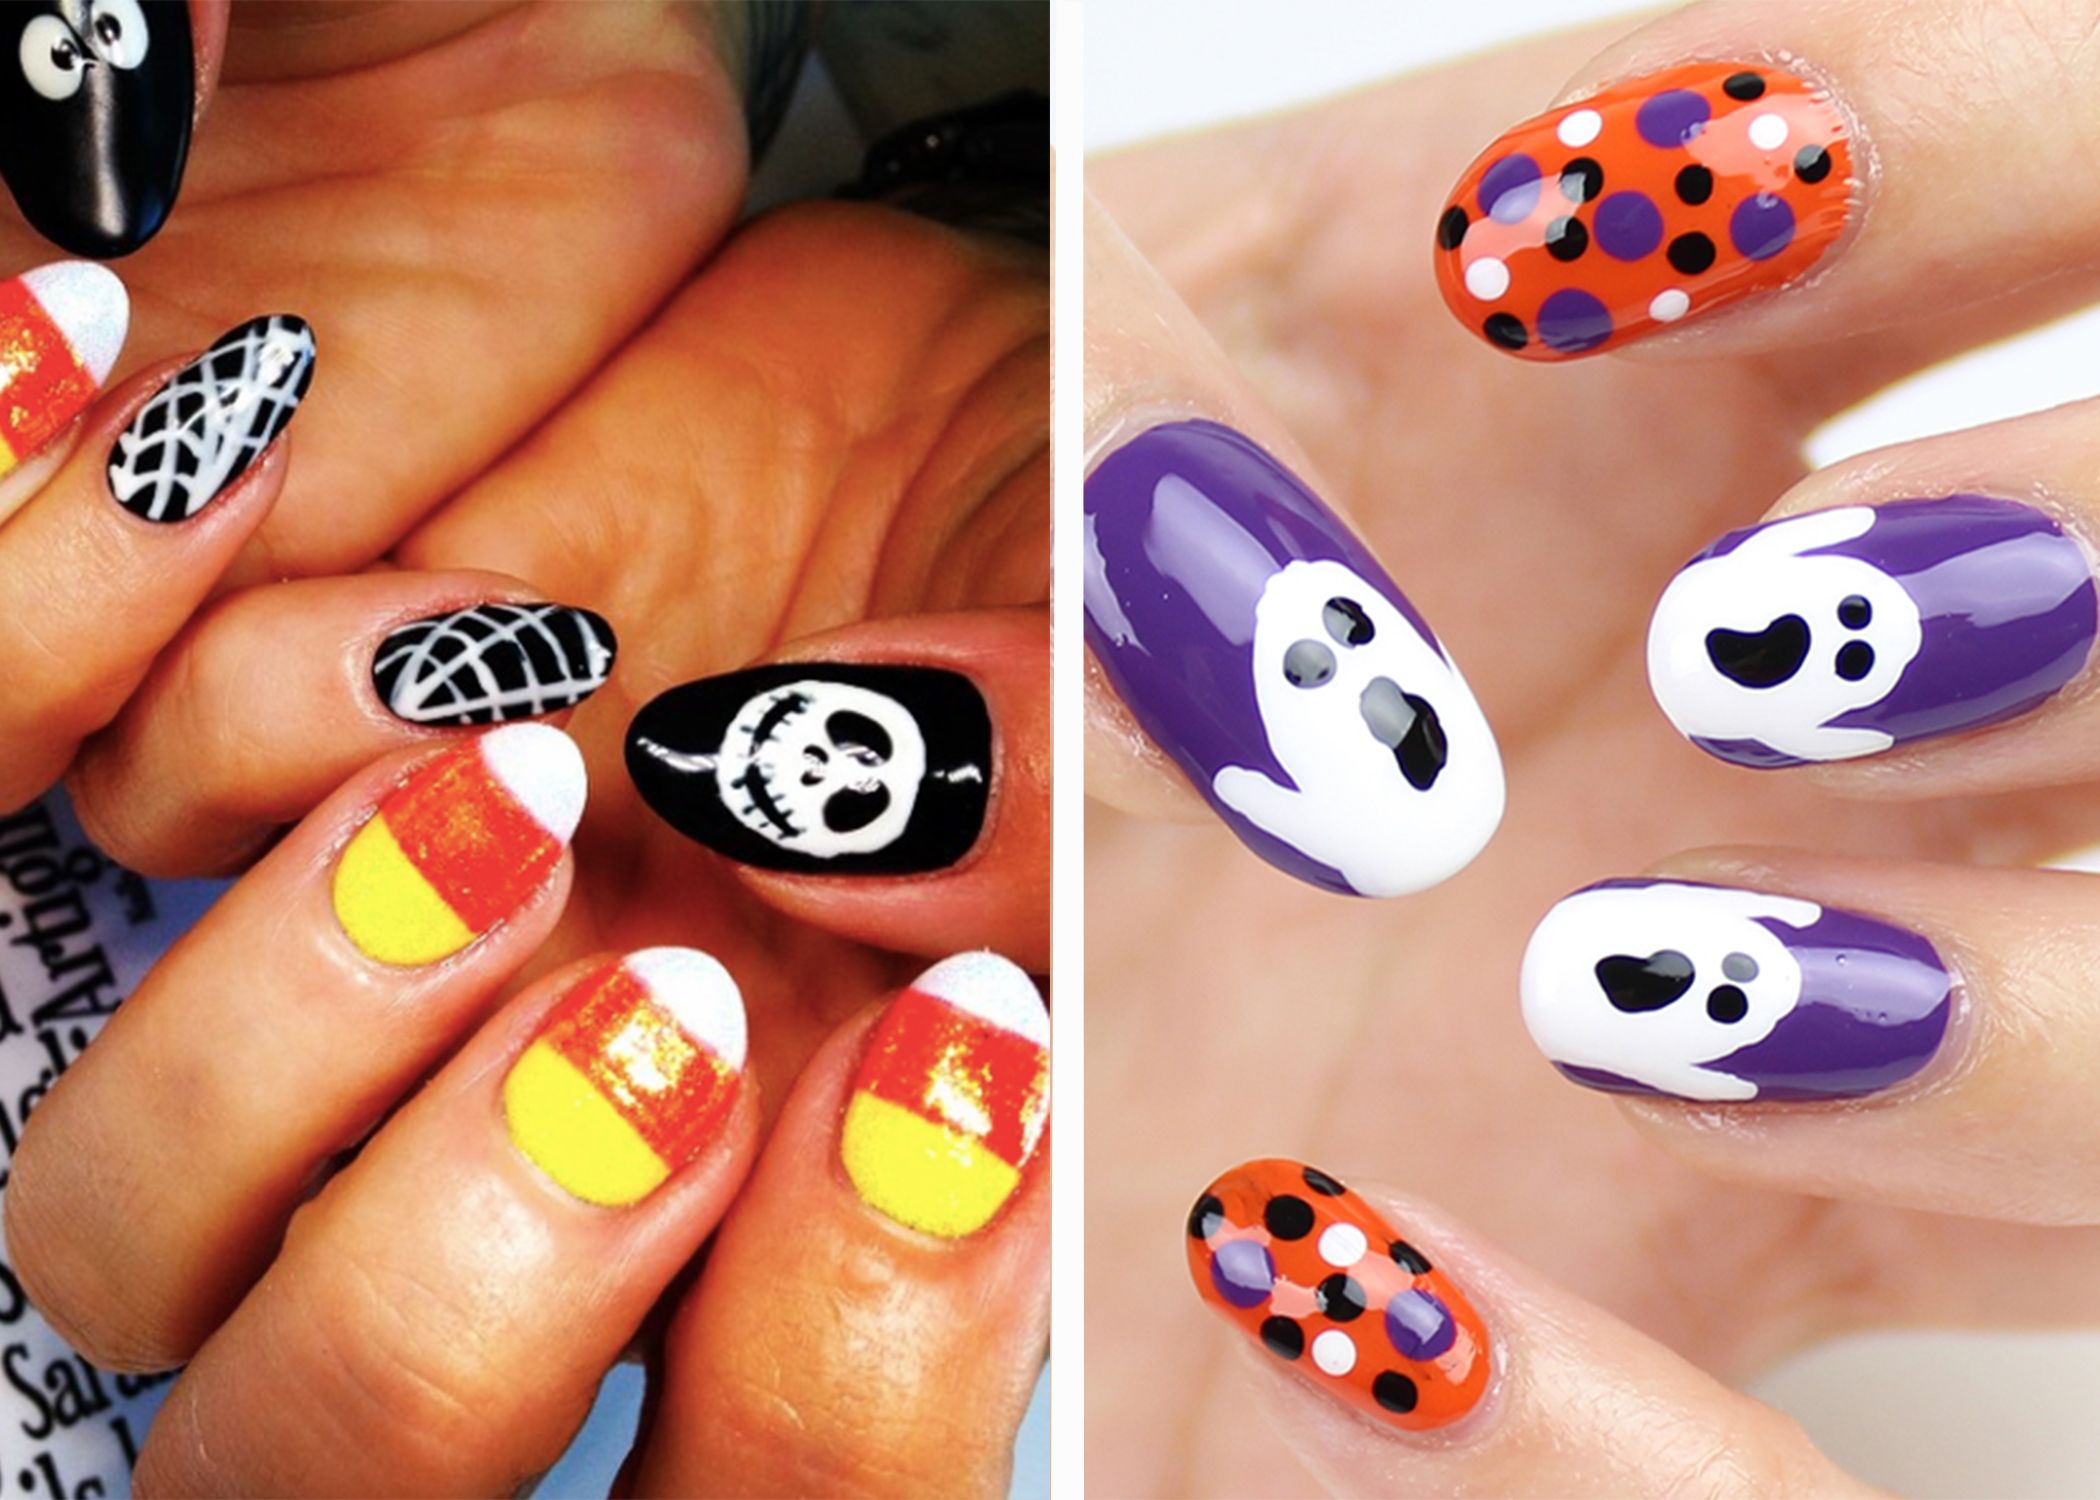 7 Shockingly Easy Nail Designs You Can Totally Do at Home / Bright Side